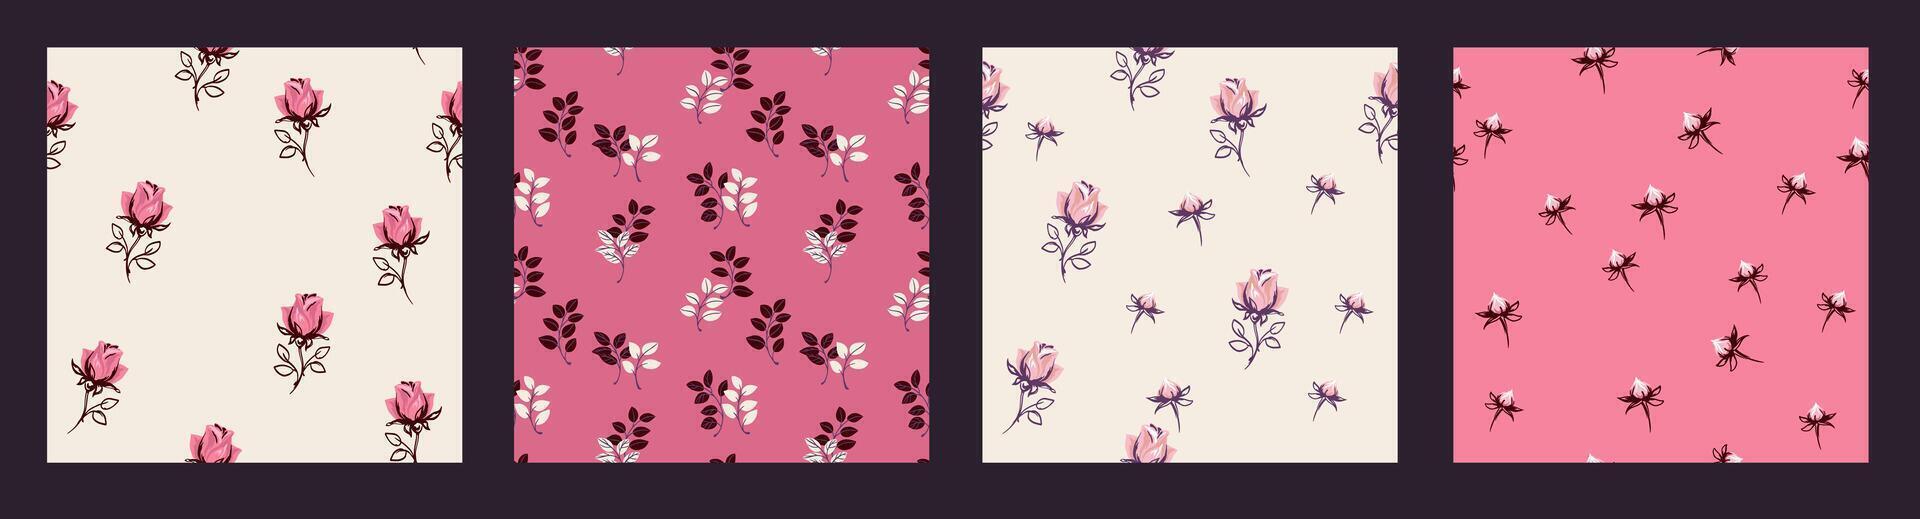 Pink cute collage of set seamless patterns with abstract tiny flowers roses, rosebud, buds, shapes stylized leaves.  Vector hand drawn sketch. Templates for design, printing, fabric,